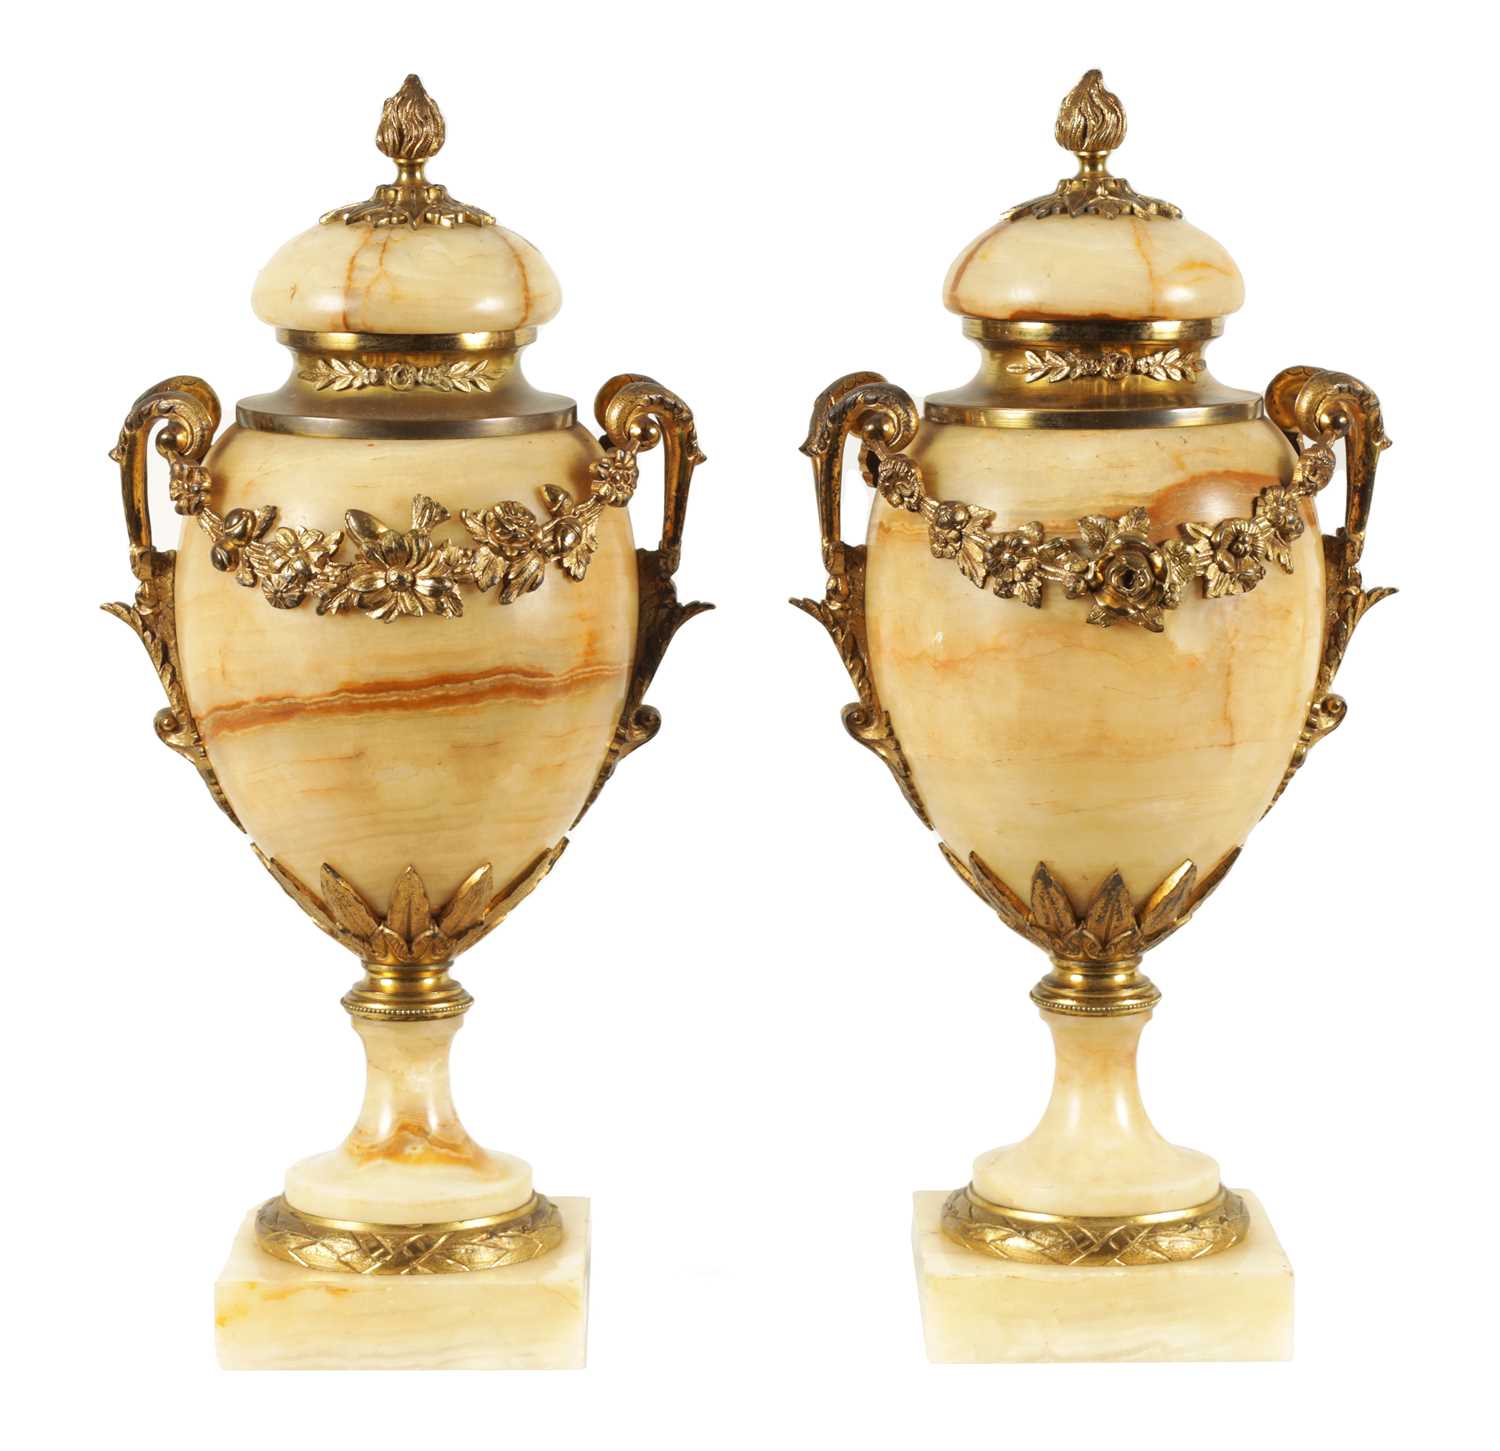 A PAIR OF 19TH CENTURY FRENCH SIENA MARBLE AND ORMOLU MOUNTED CASSOLETTES